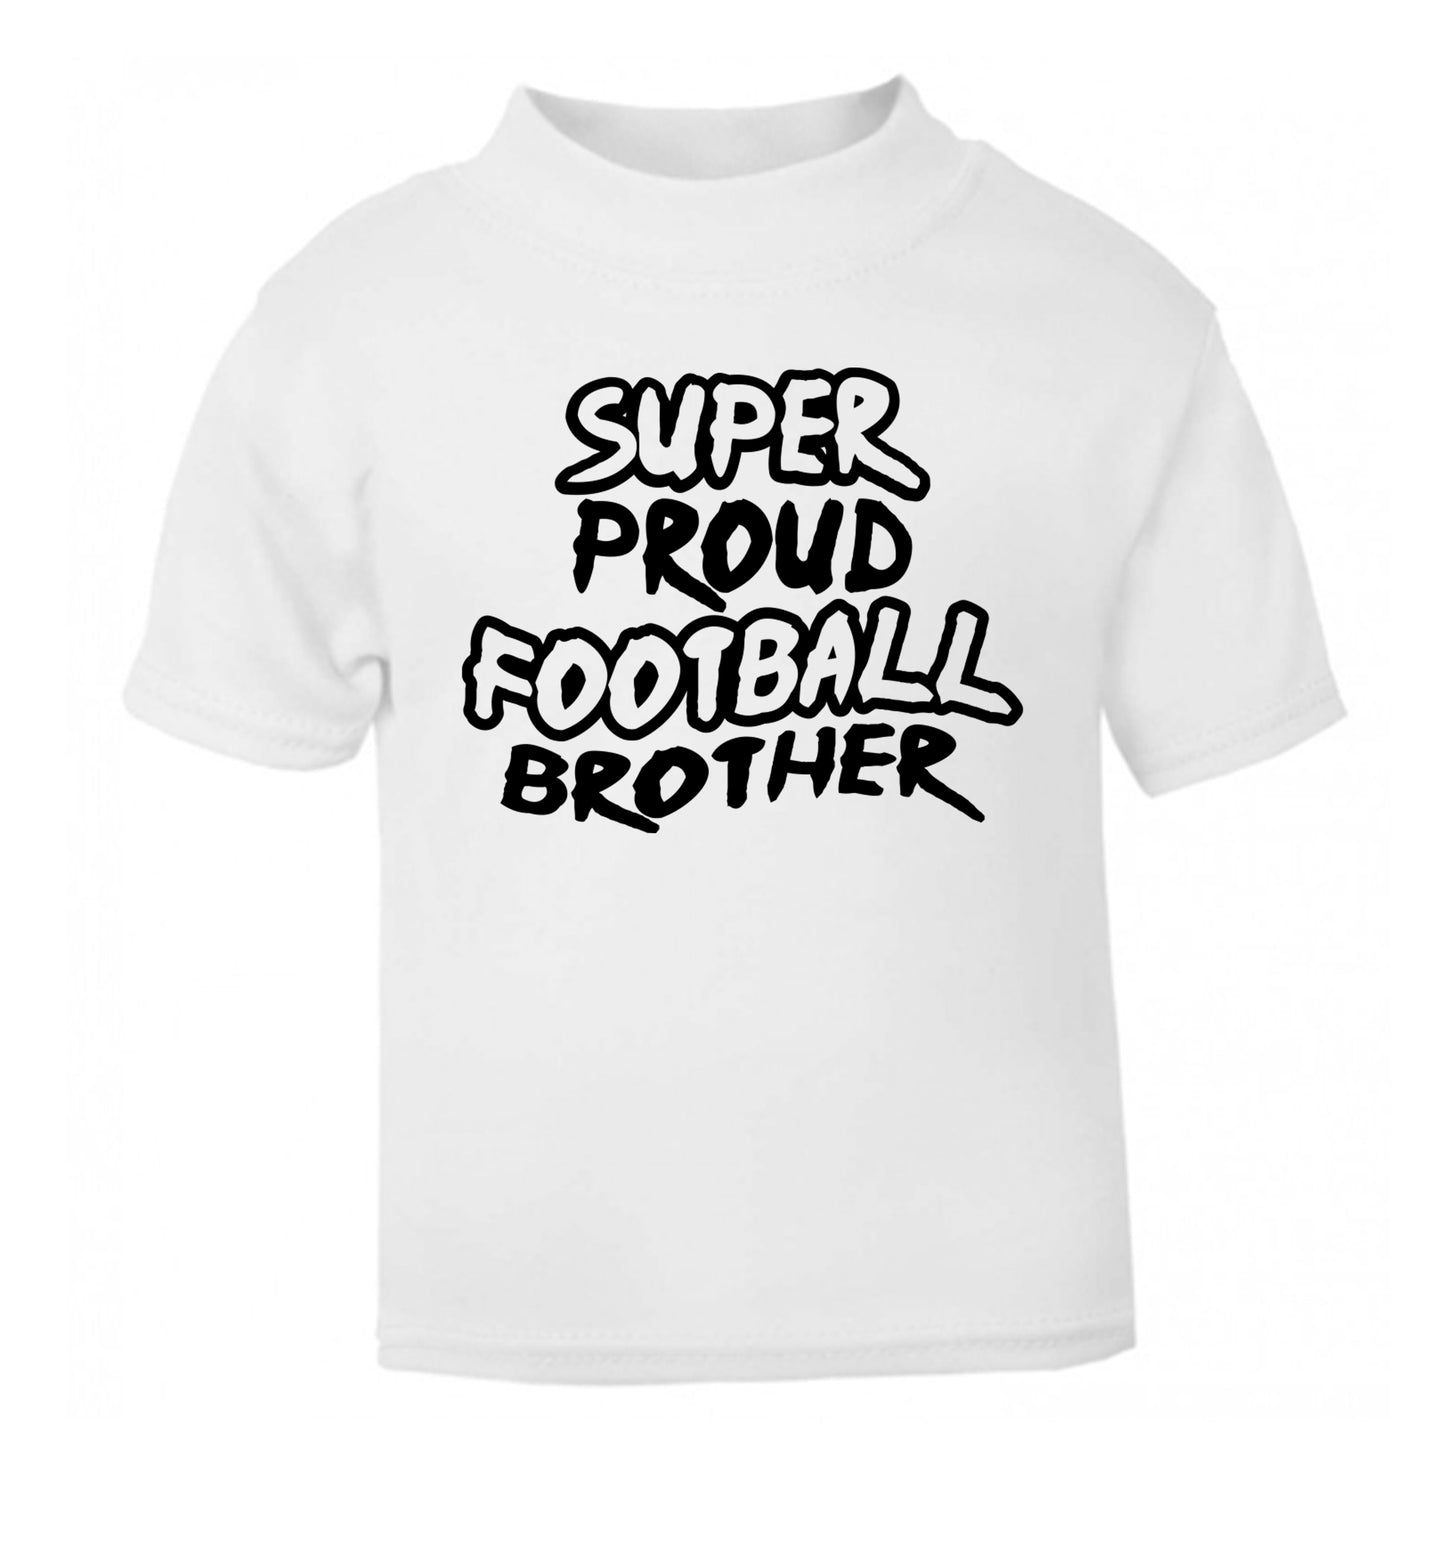 Super proud football brother white Baby Toddler Tshirt 2 Years